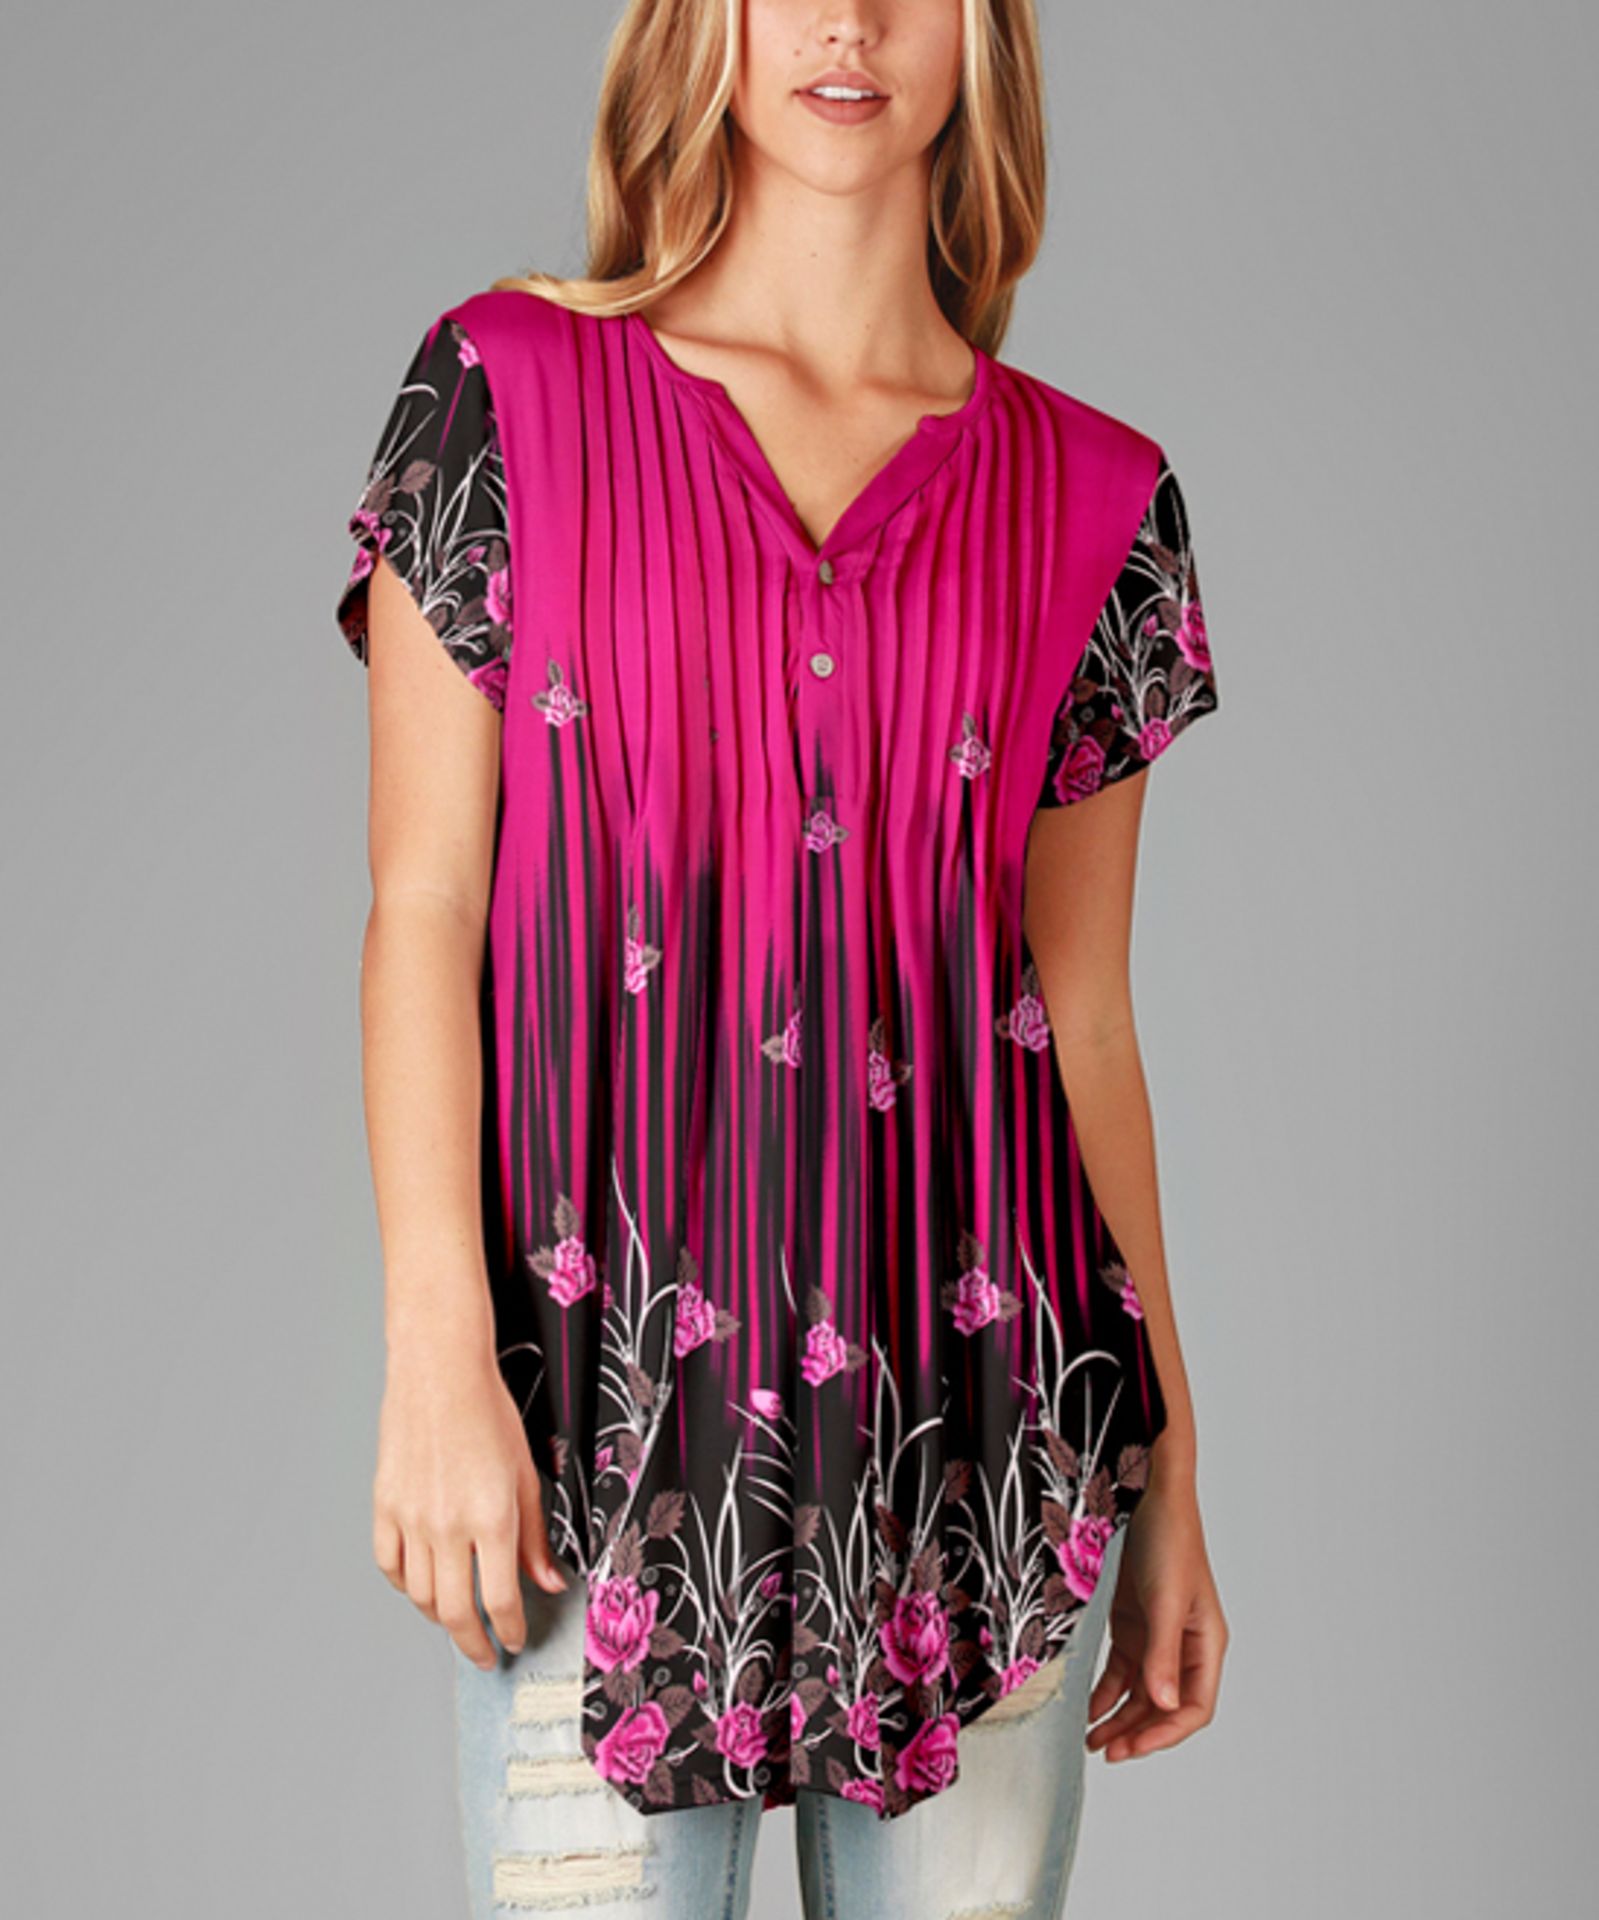 Simply Aster Fuchsia & Black Floral Button-Front Tunic - Plus (Us Size: 4X) [Ref: 37677241]